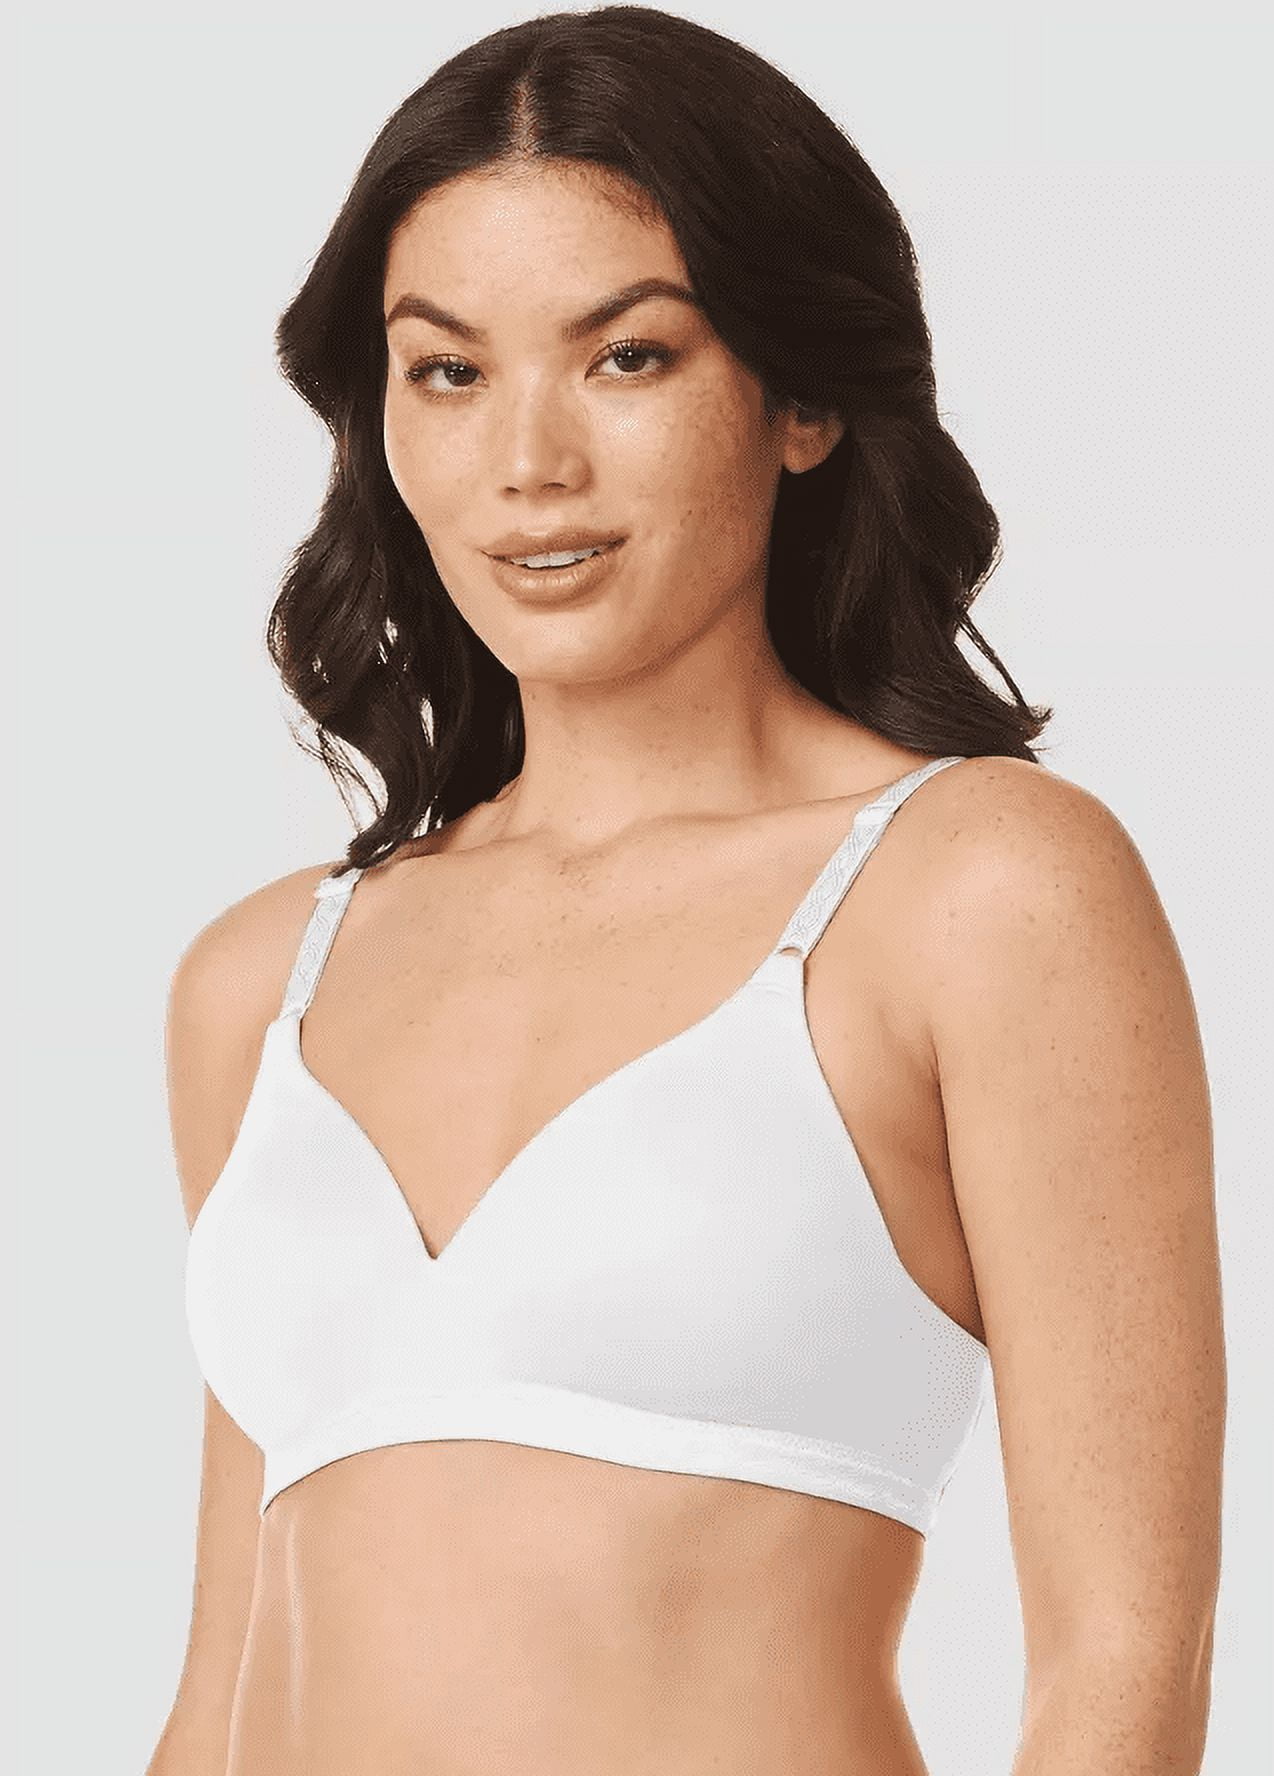 Simply Perfect by Warner's Women's Supersoft Wirefree Bra RM1691T - 34A  Butterscotch